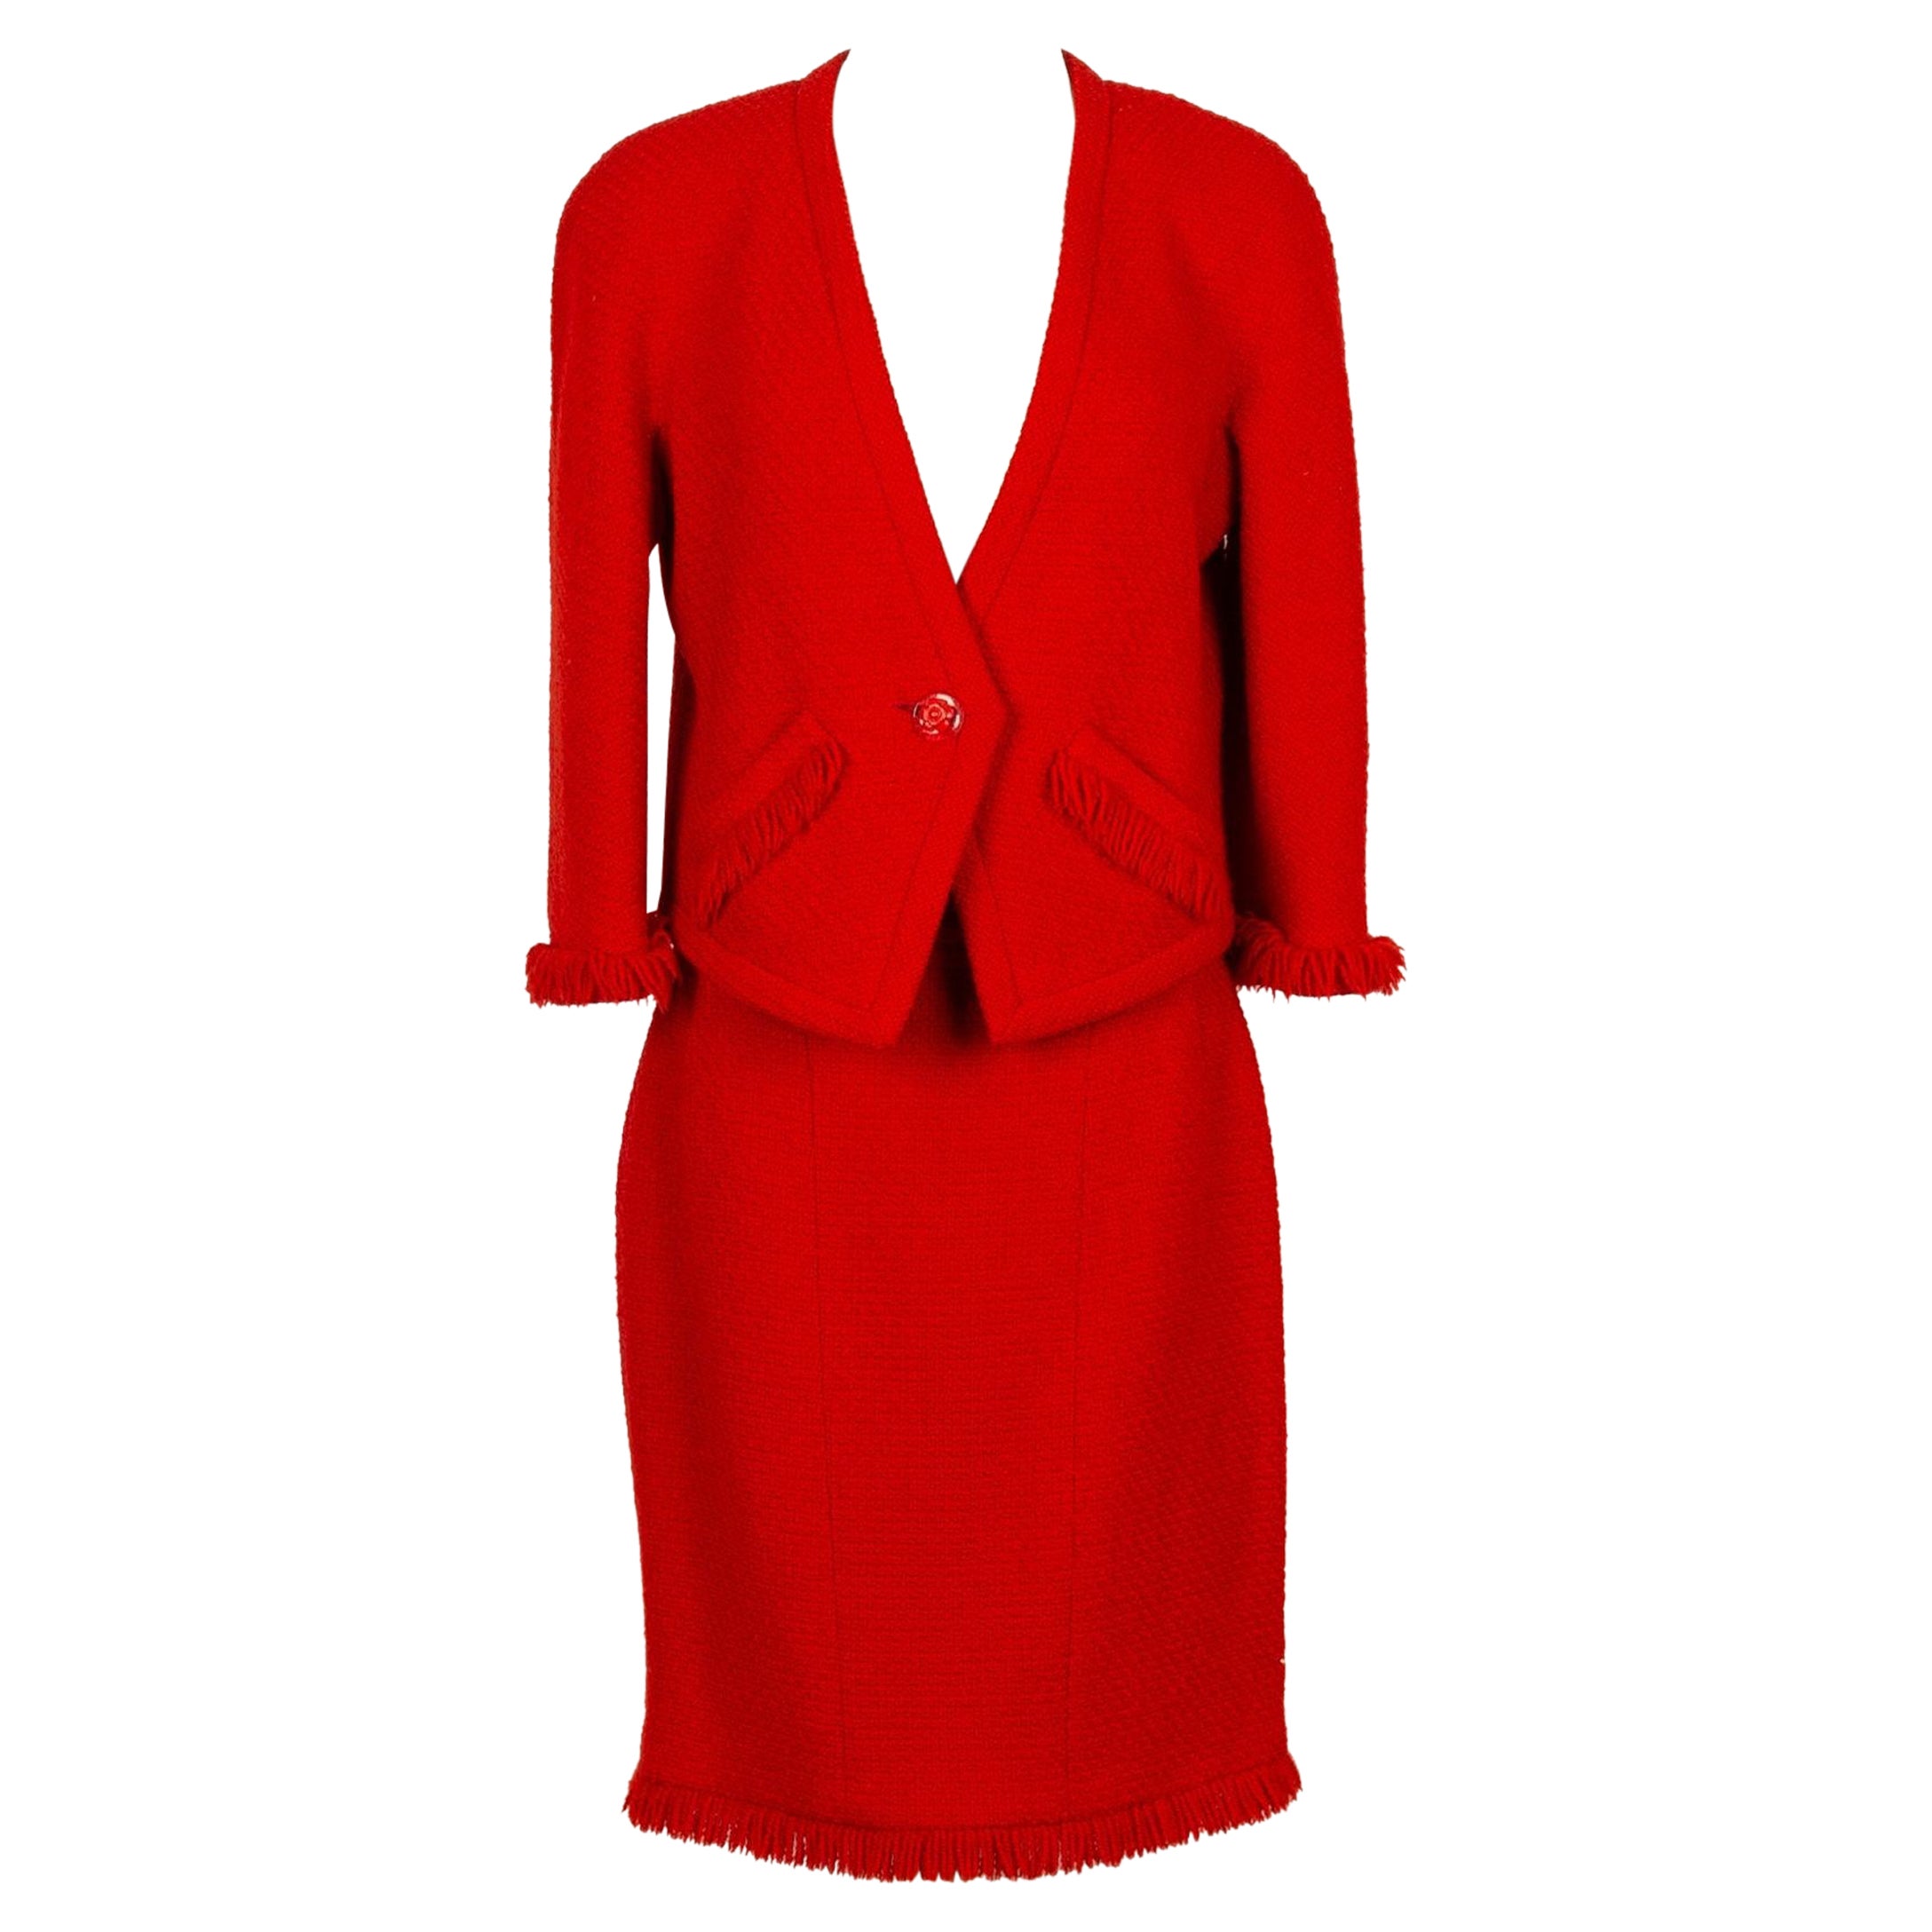 Chanel Suit with Skirt in Red Wool Tweed and Silk Lining, 1990s For Sale